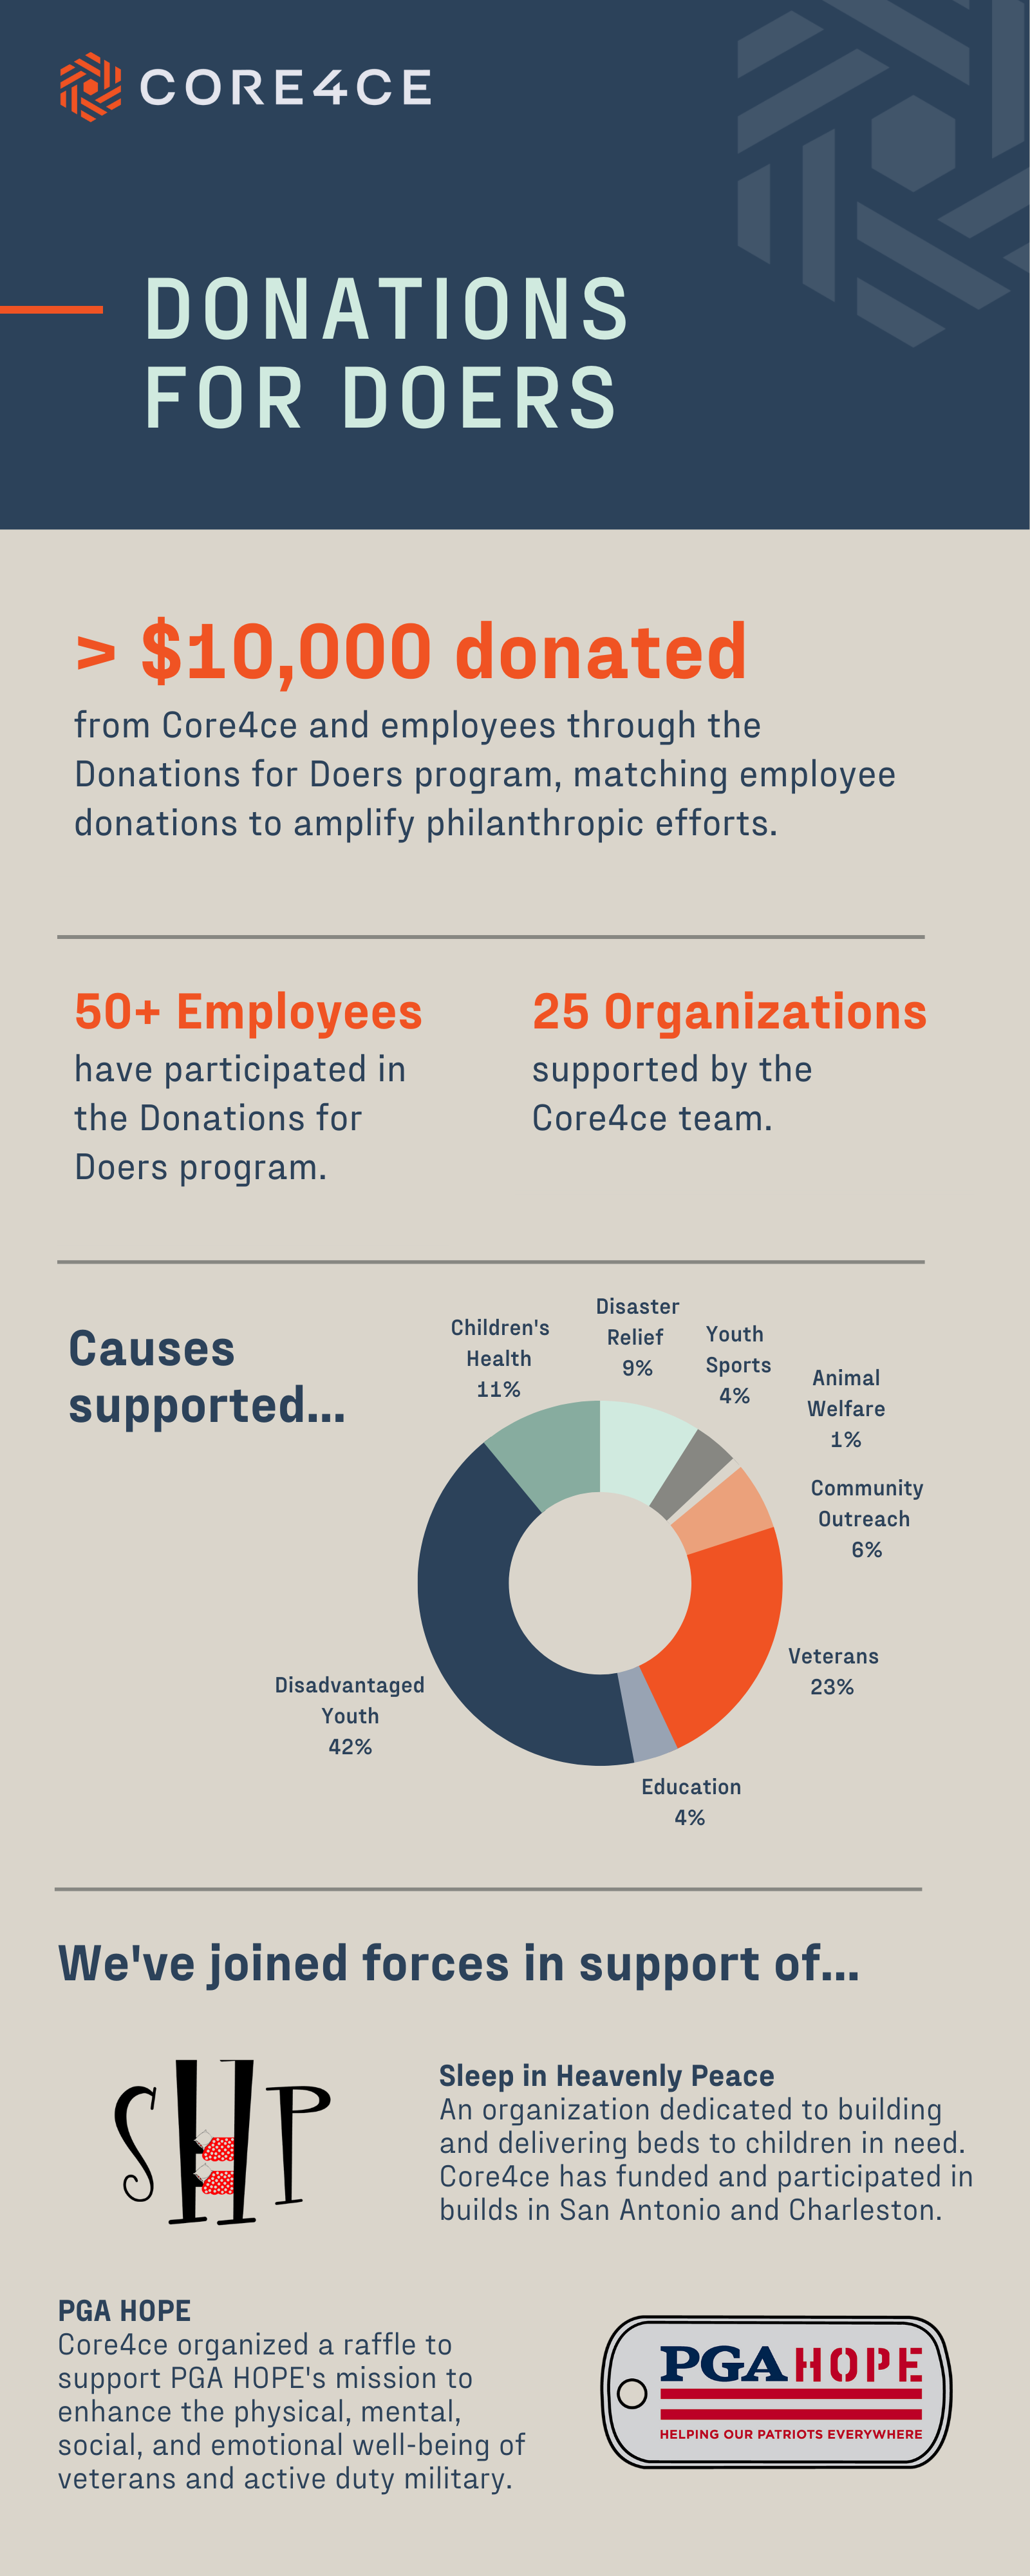 Core4ce's Donations for Doers Corporate Matching Program